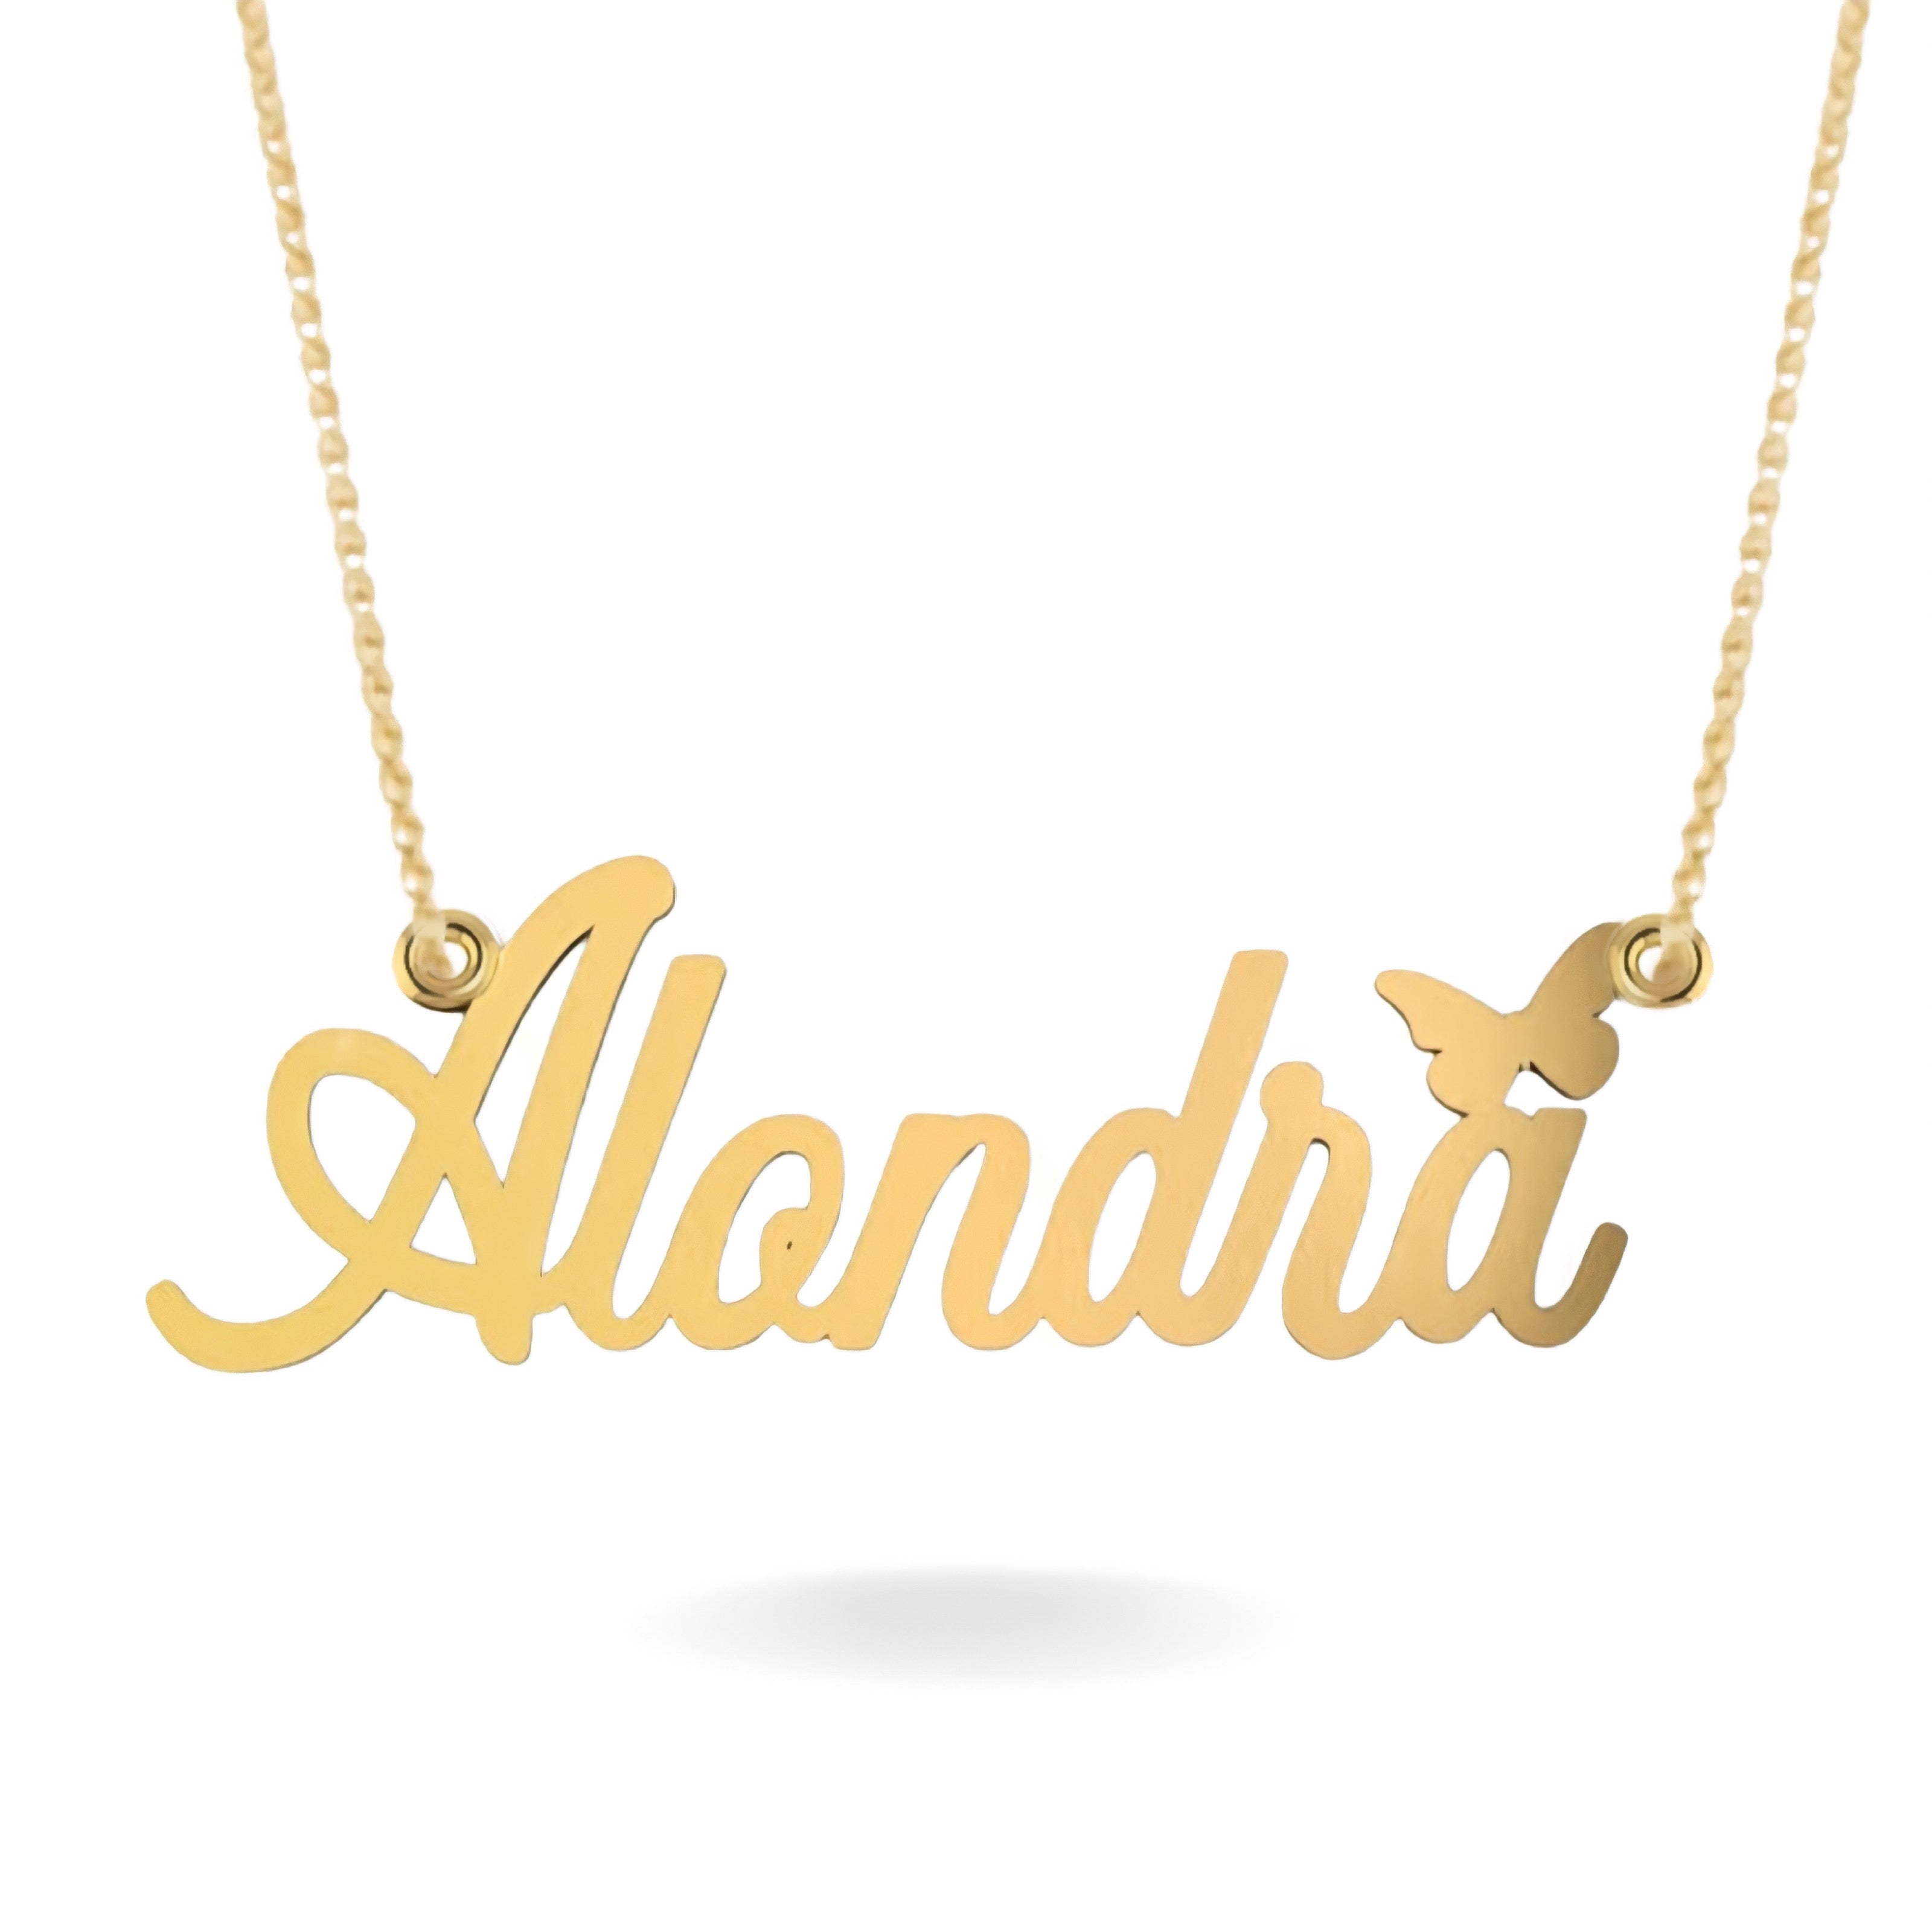 14K YELLOW GOLD SCRIPT BUTTERFLY KISS FLOATING NAME NECKLACE